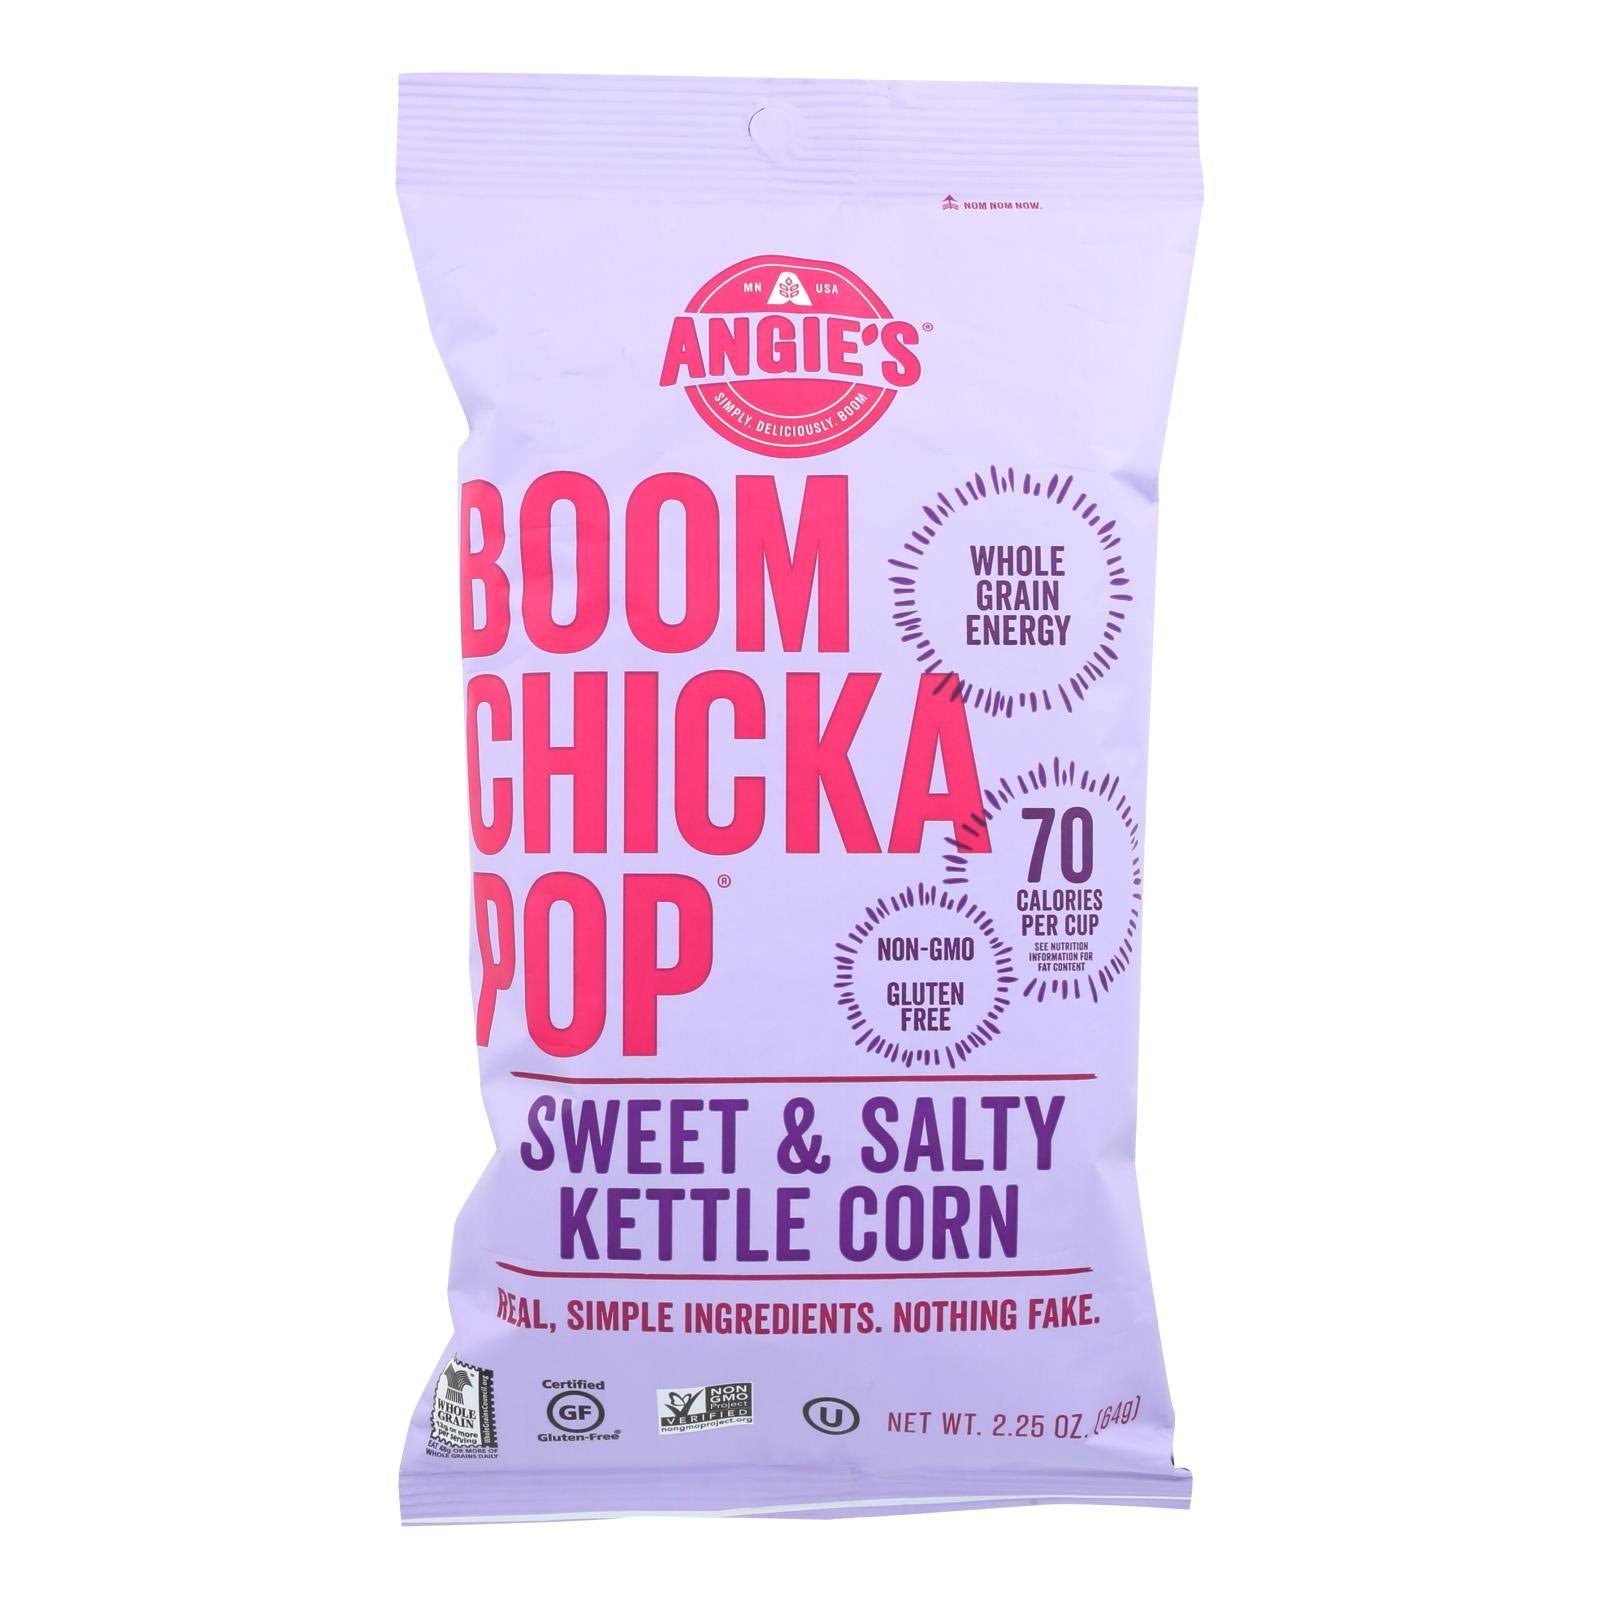 Angie's Kettle Corn Boom Chicka Pop Sweet And Salty Popcorn - 2.25 Oz - Pack of